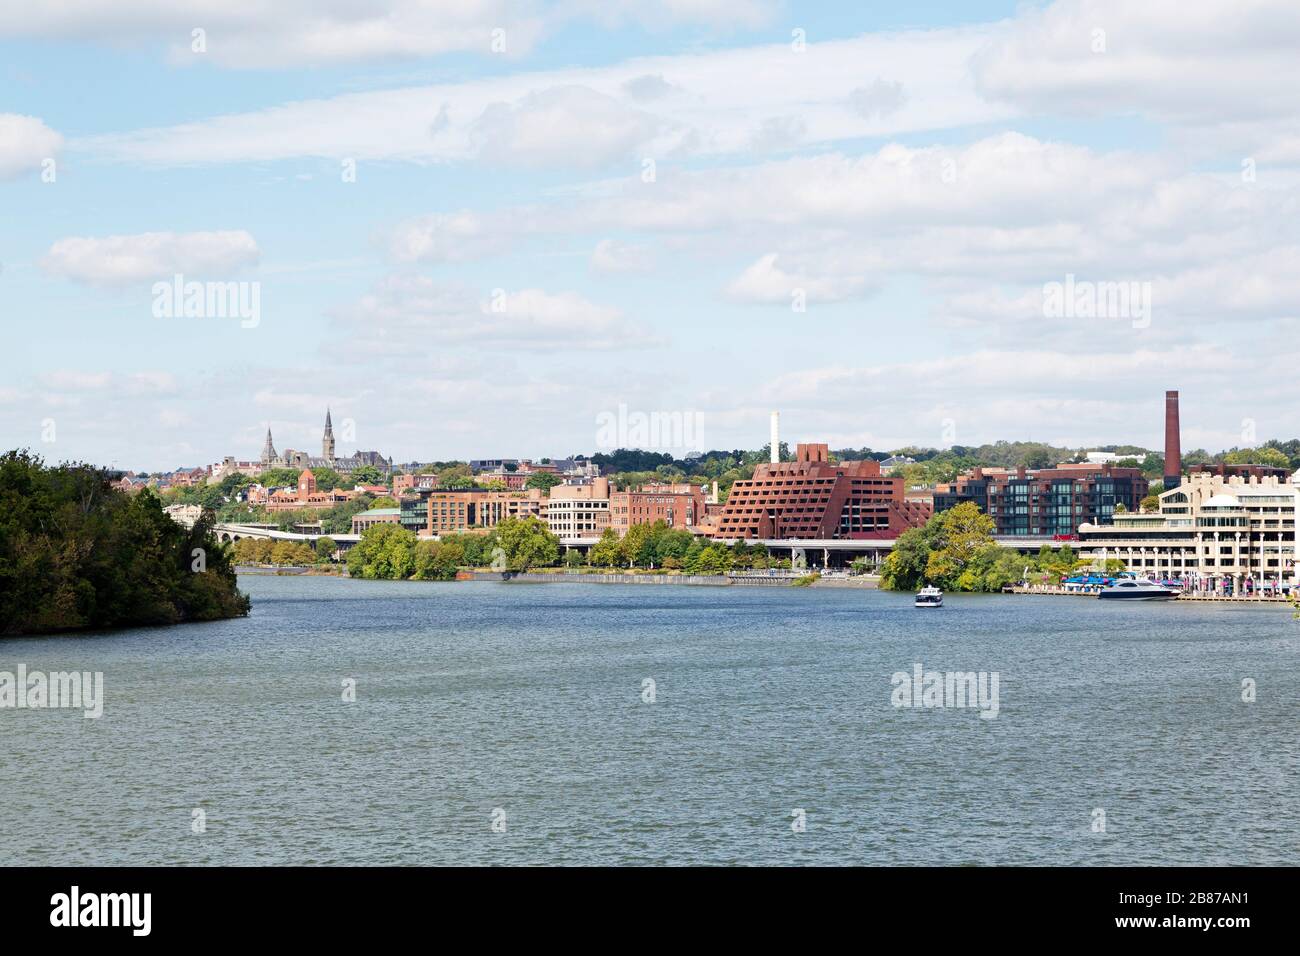 The Georgetown waterfront in Washington DC, USA. The Potomac River flows in the foreground. Stock Photo